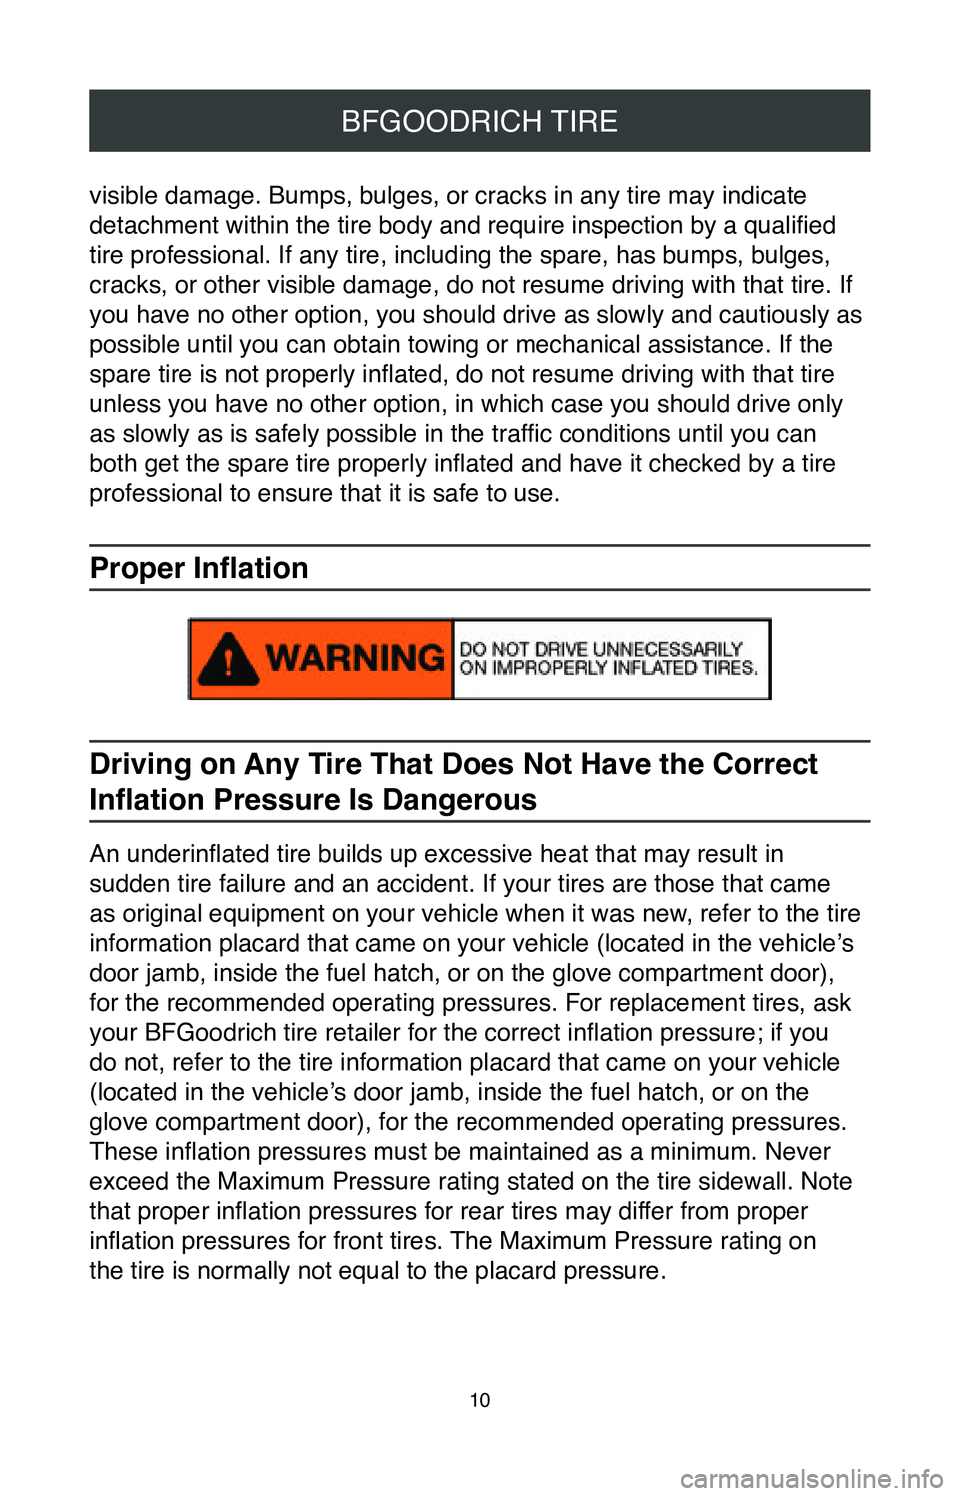 TOYOTA TACOMA 2020  Warranties & Maintenance Guides (in English) 10
BFGOODRICH TIRE
visible damage. Bumps, bulges, or cracks in any tire may indicate 
detachment within the tire body and require inspection by a qualified 
tire professional. If any tire, including t